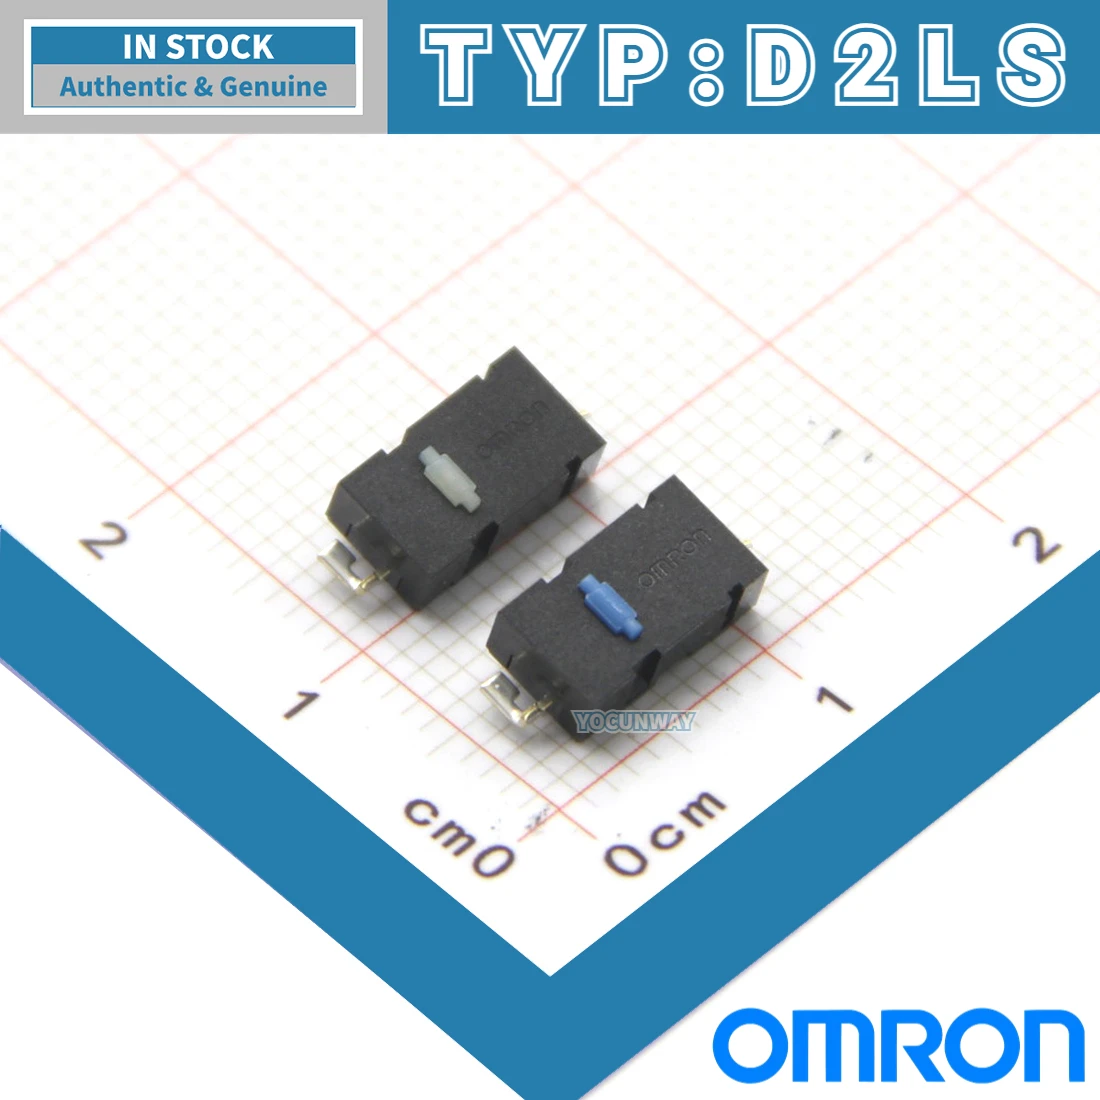 

New Authentic Original Japan OMRON Micro Switch D2LS-21 D2LS-11 Blue Dot Game Mouse Switch For Anywhere MX Logitech M905 G903